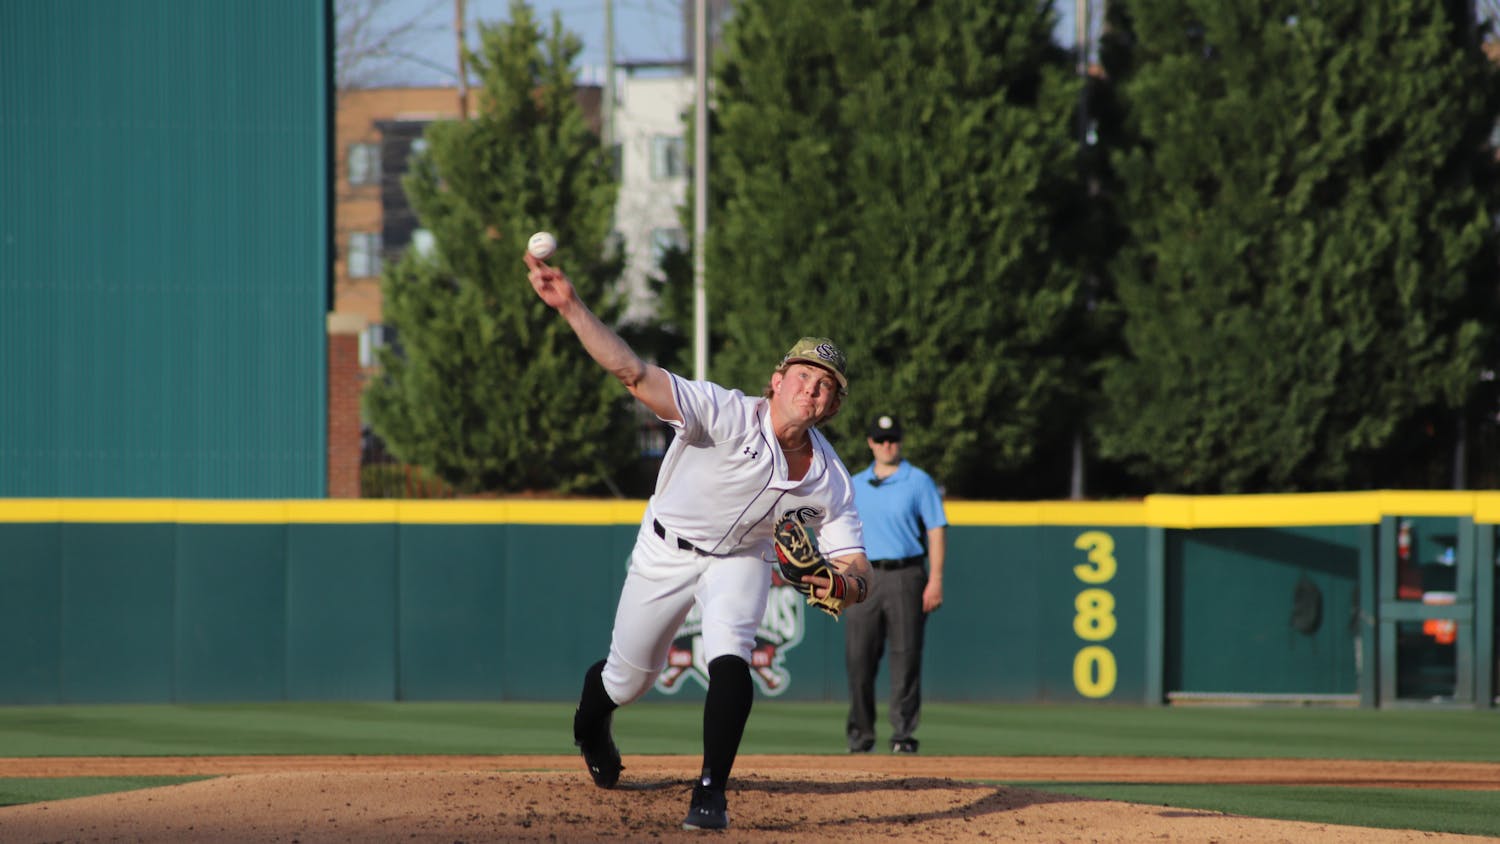 Sophomore pitcher Eli Jones pitching for South Carolina in the game against North Carolina A&amp;T at Founders Park on Feb. 28, 2023. The Gamecocks beat the Aggies 11-3 for its ninth consecutive win of the 2023 season.